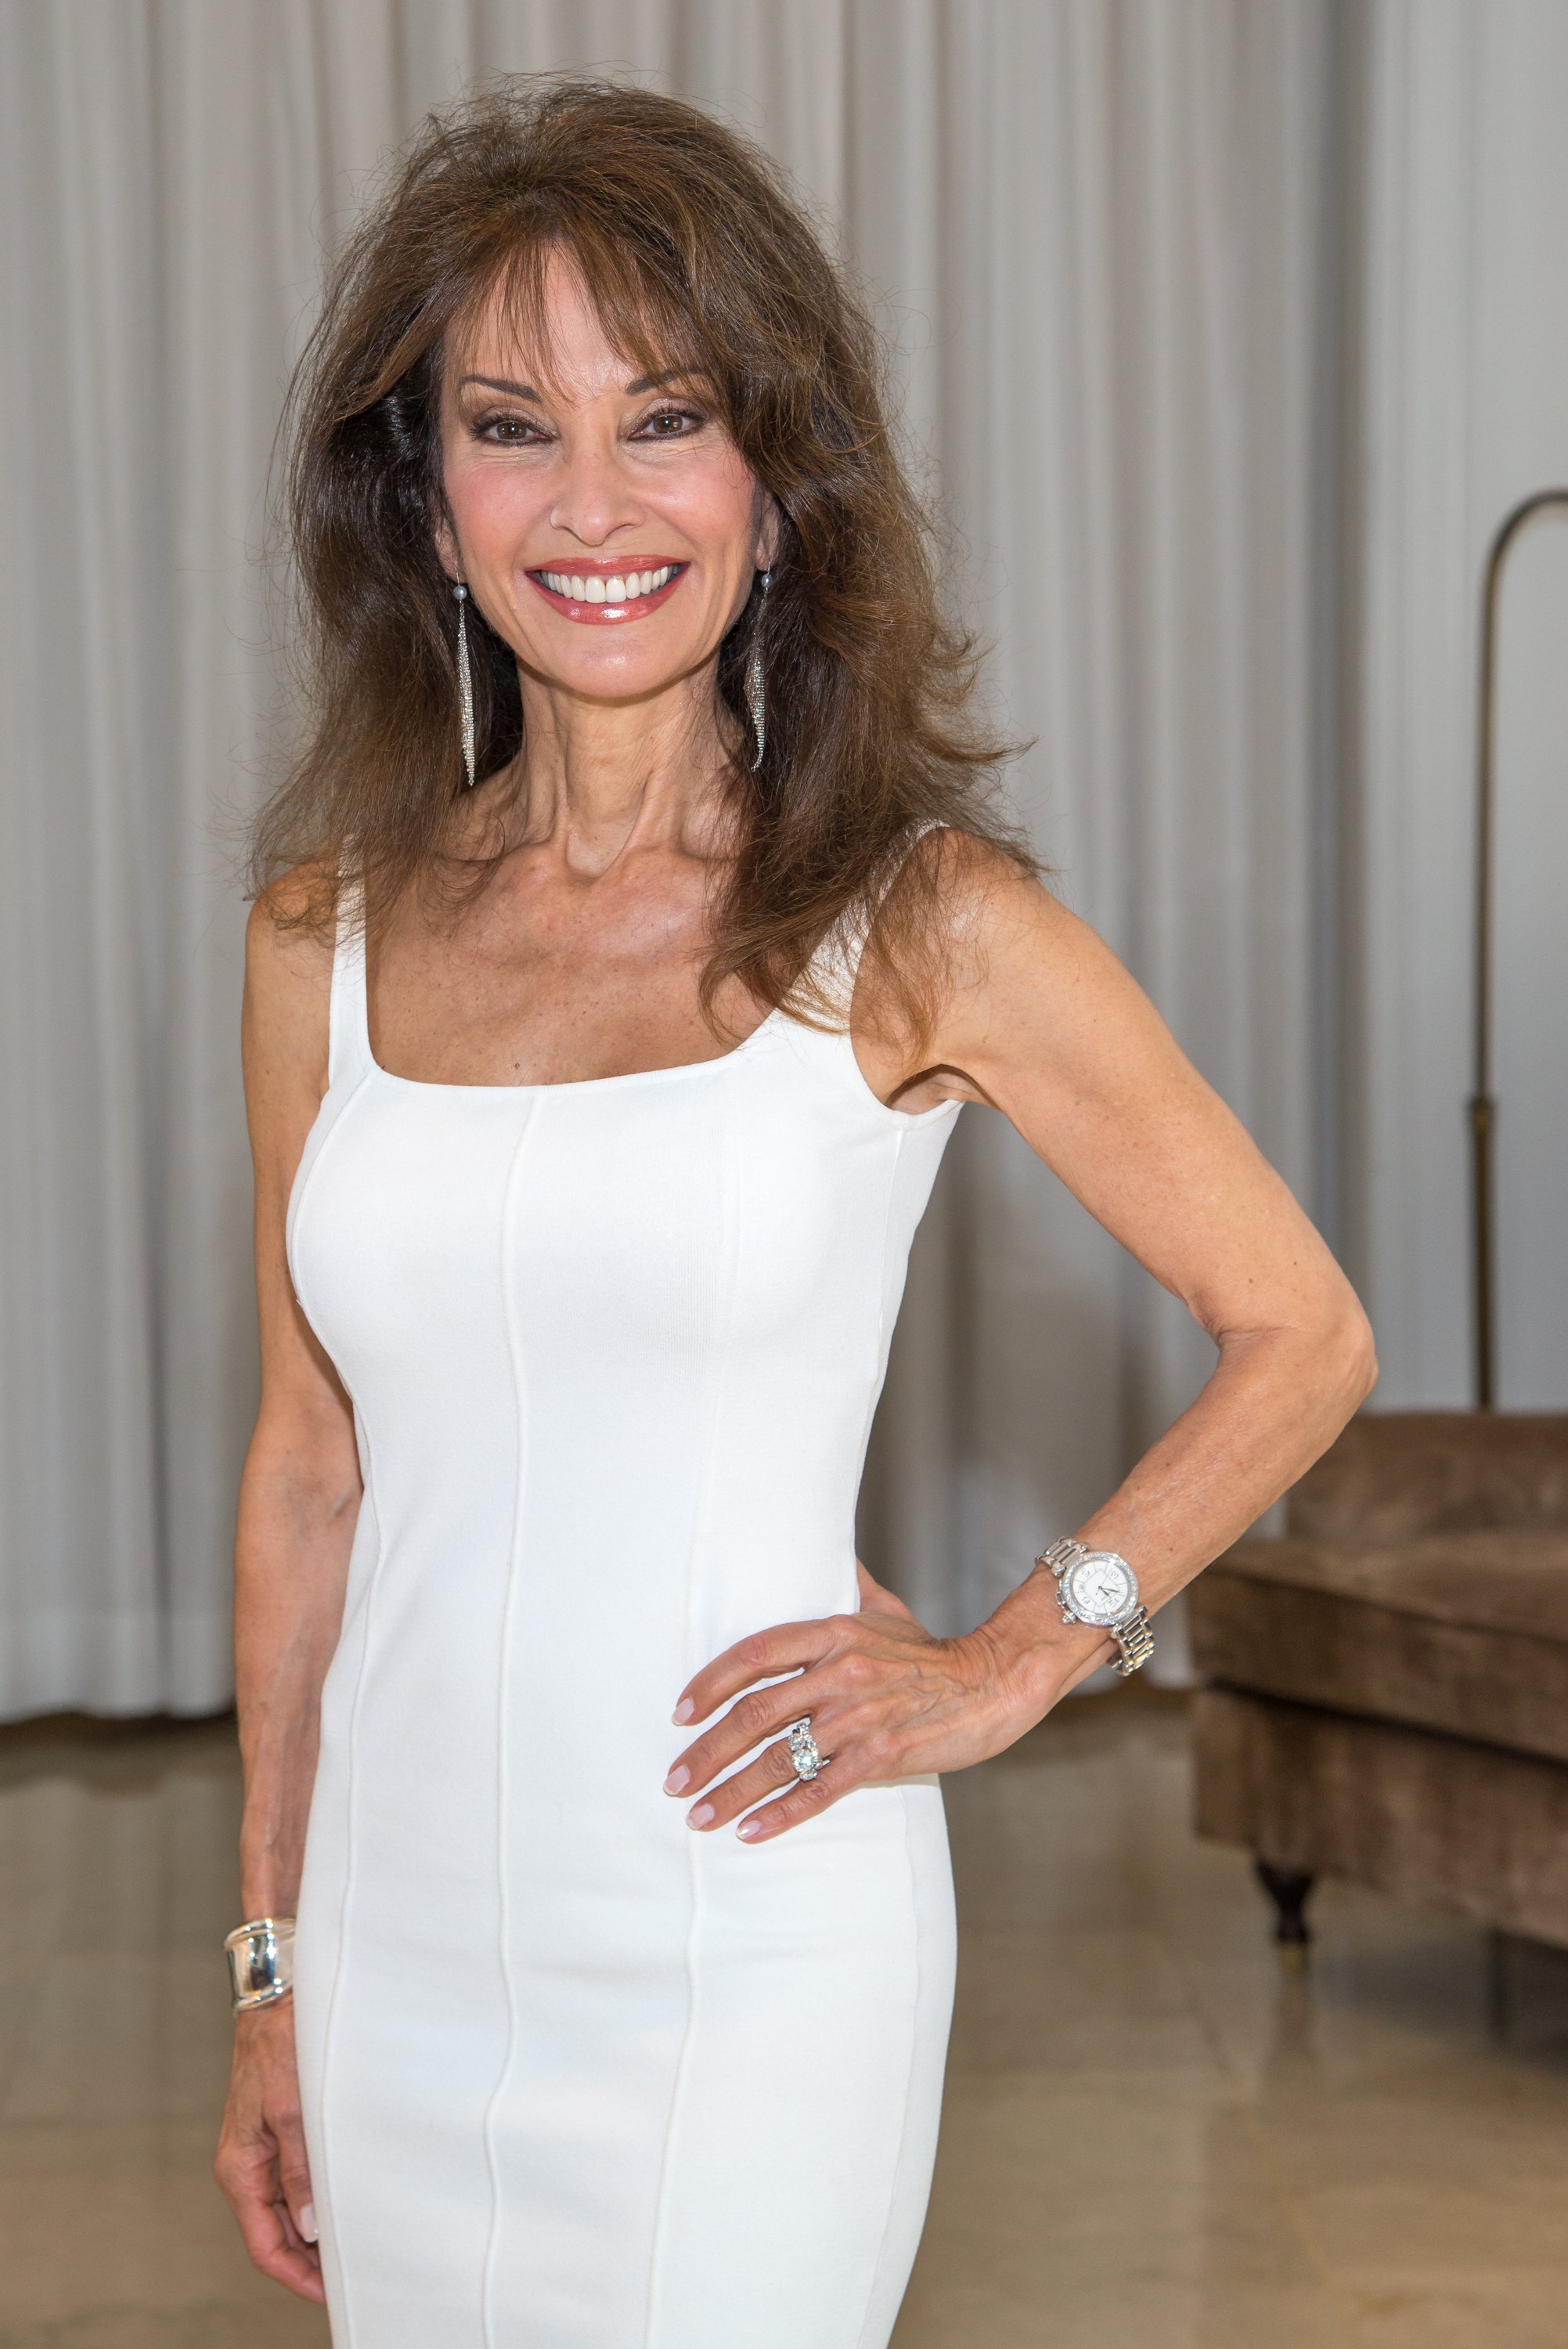 Susan Lucci attends The Garden City Hotel 140th Anniversary Celebration at Garden City Hotel on July 30, 2014 in Garden City, New York | Photo: Getty Images